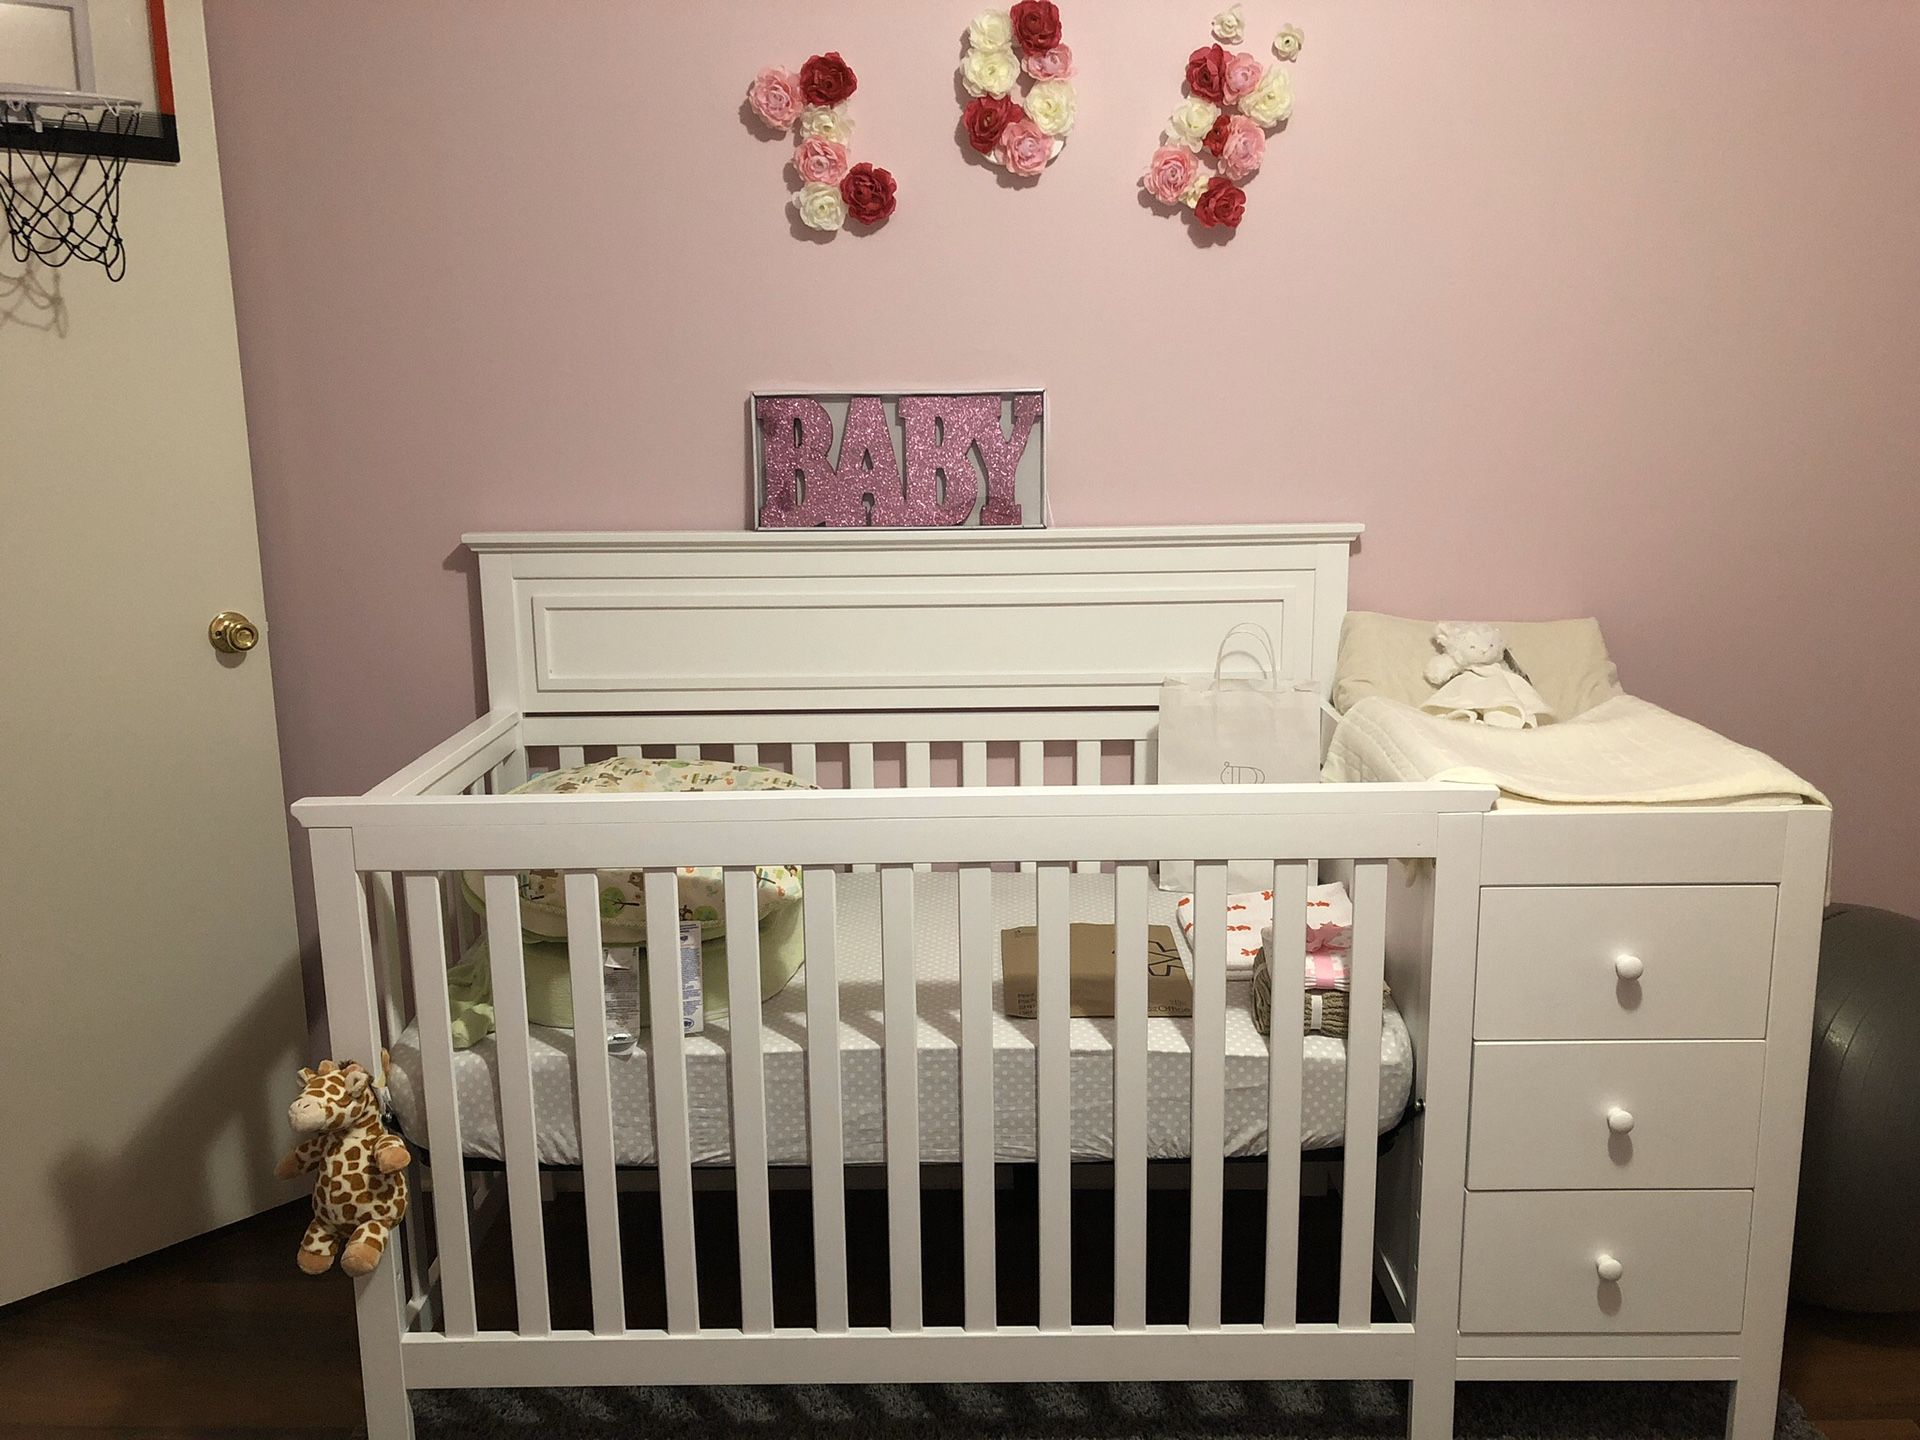 Infants Crib w/ Mini Dresser & Changing Table (only used for 3 months)